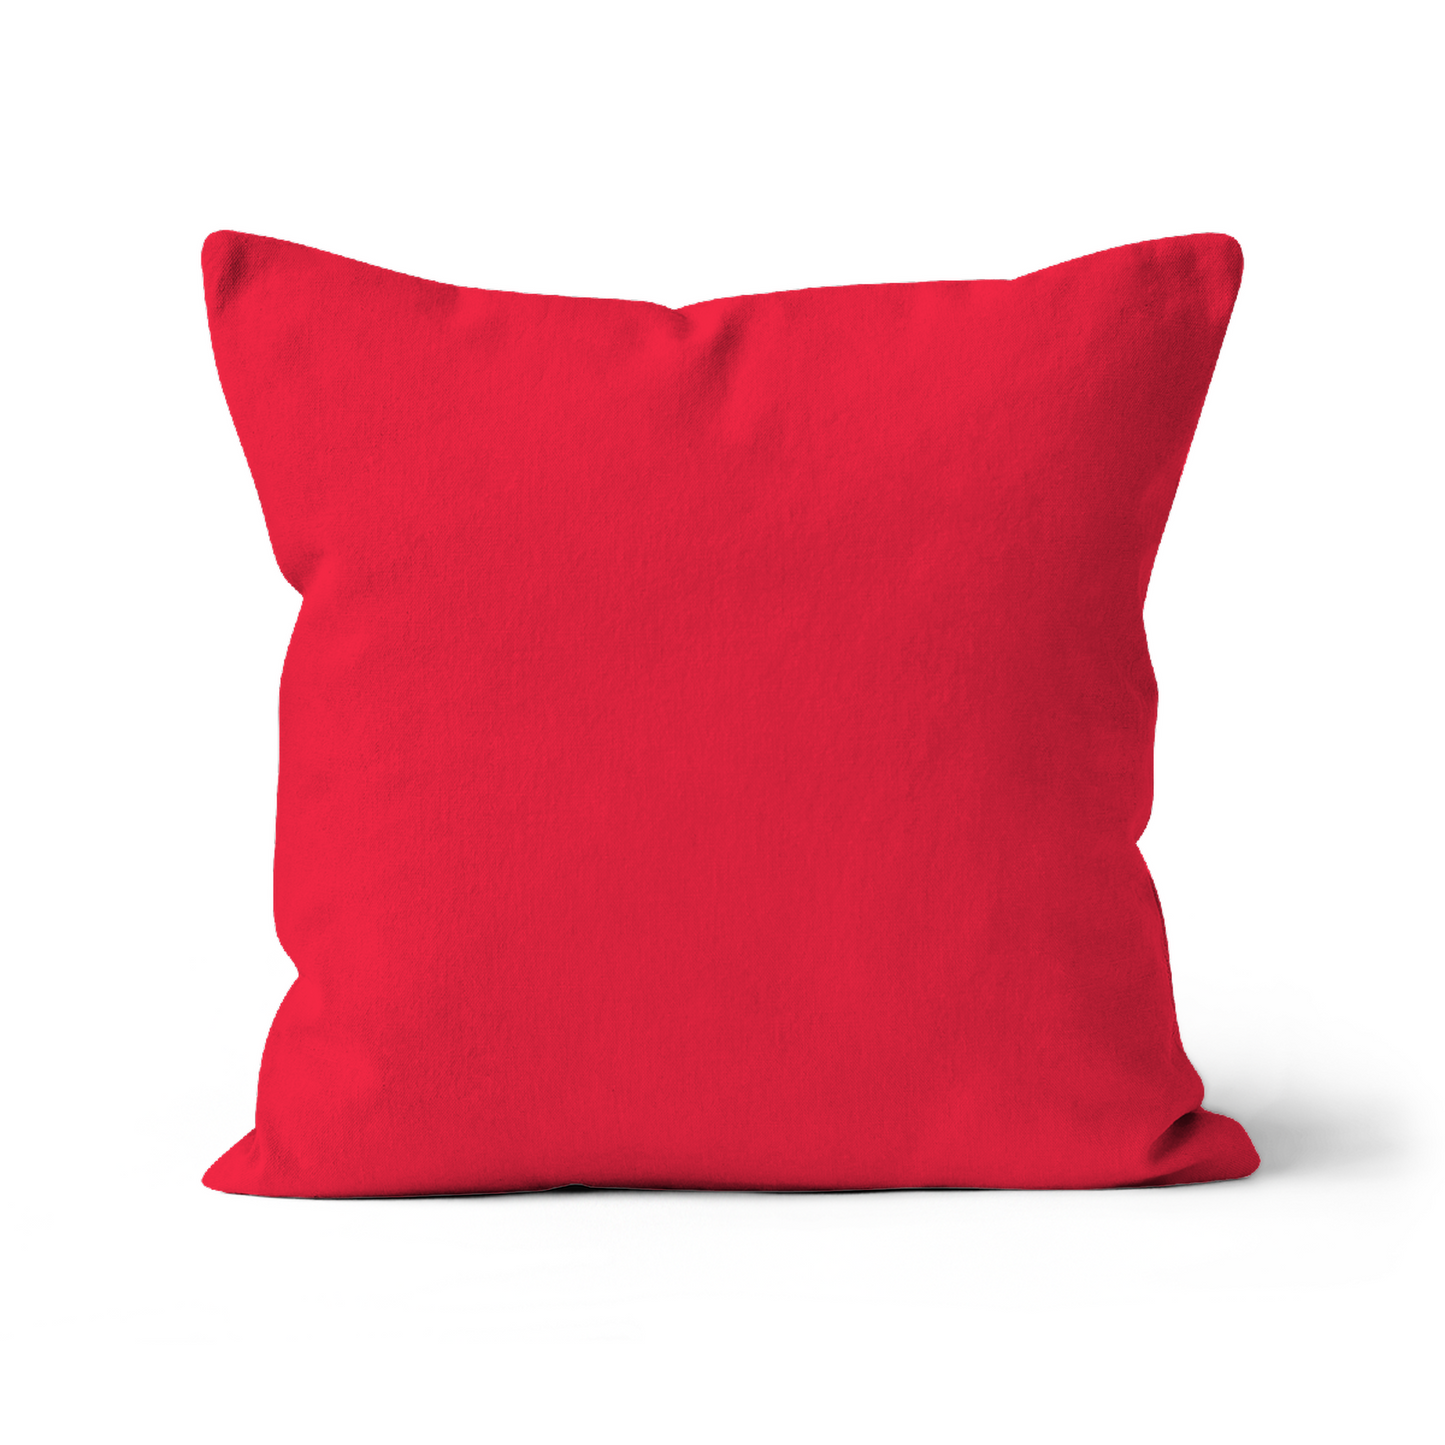 Just A Hole Throw Pillow With Insert